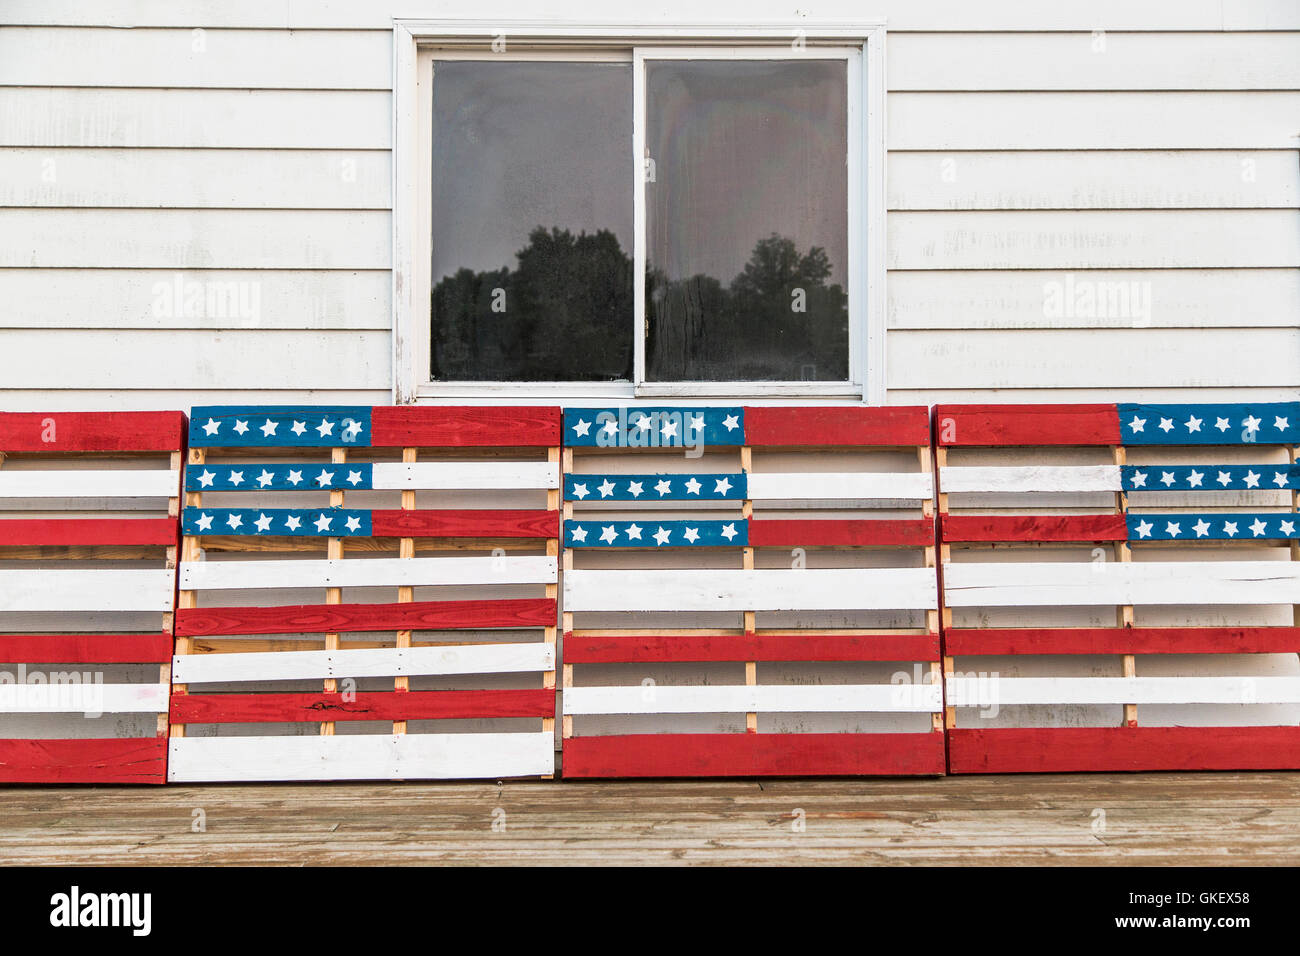 A patriotic display of wooden pallets painted in American flag motifs in red, white, and blue. Stock Photo